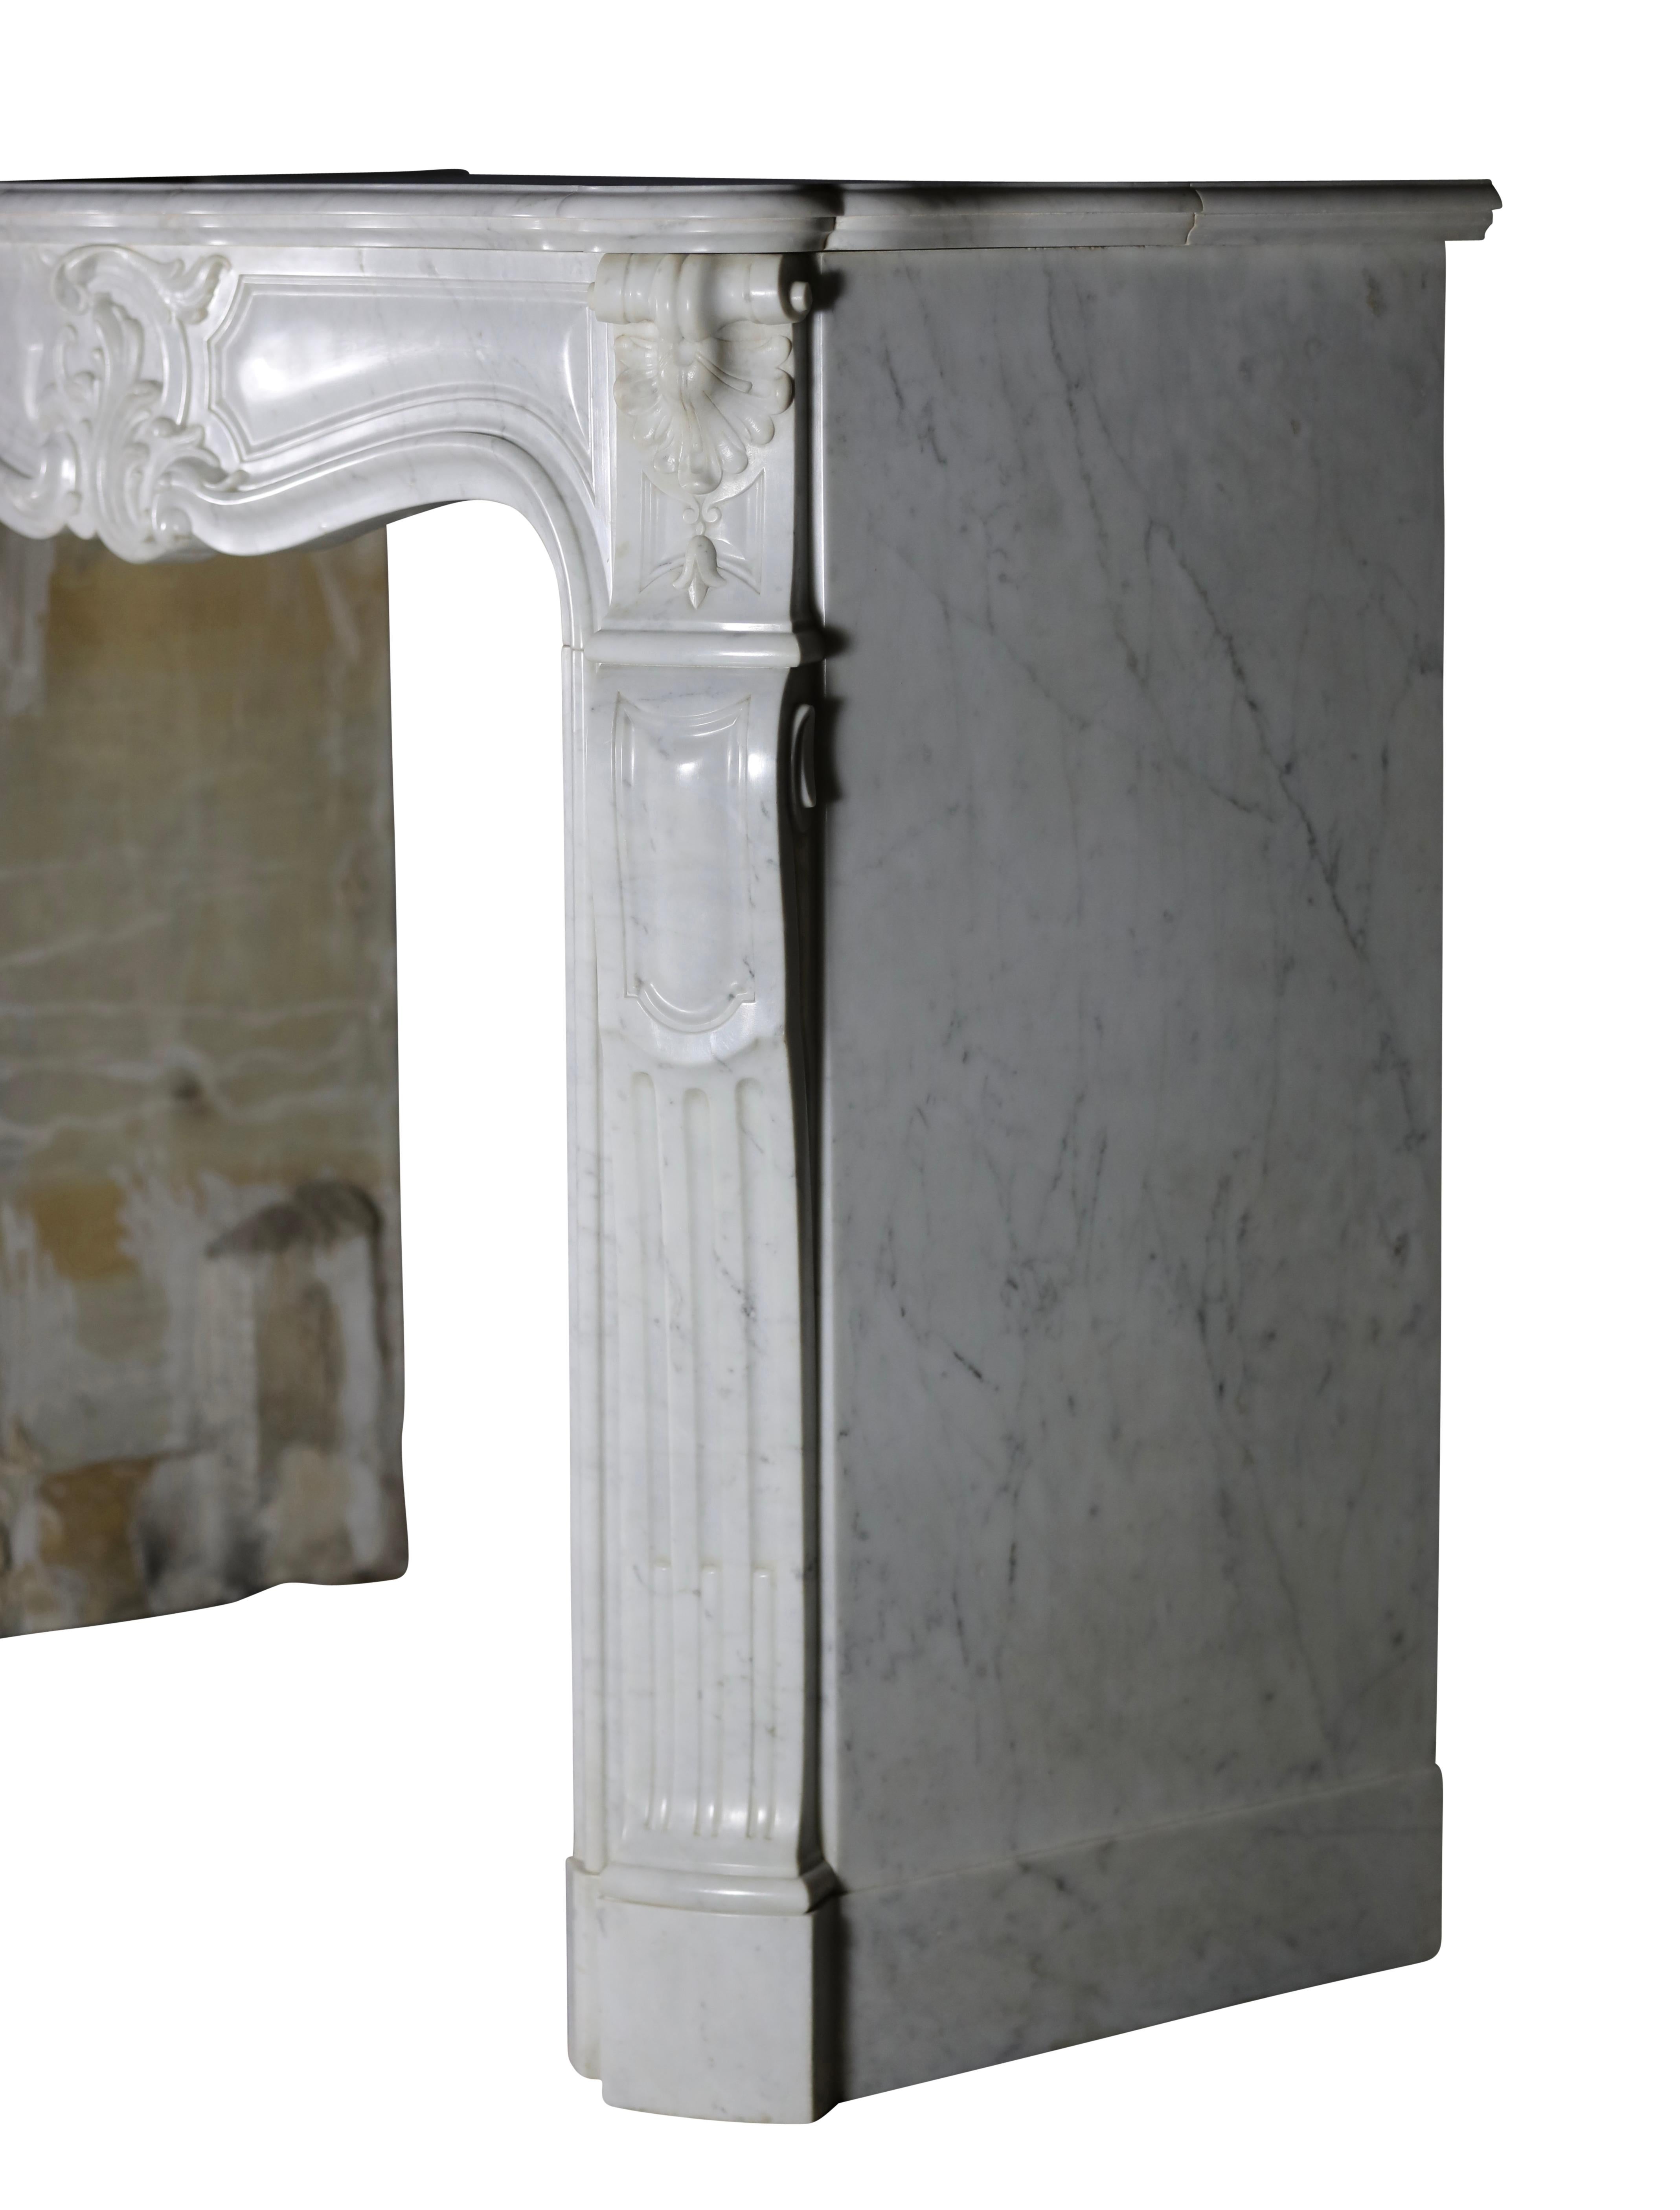 Exquisite Antique White Marble Fireplace Surround In Excellent Condition For Sale In Beervelde, BE